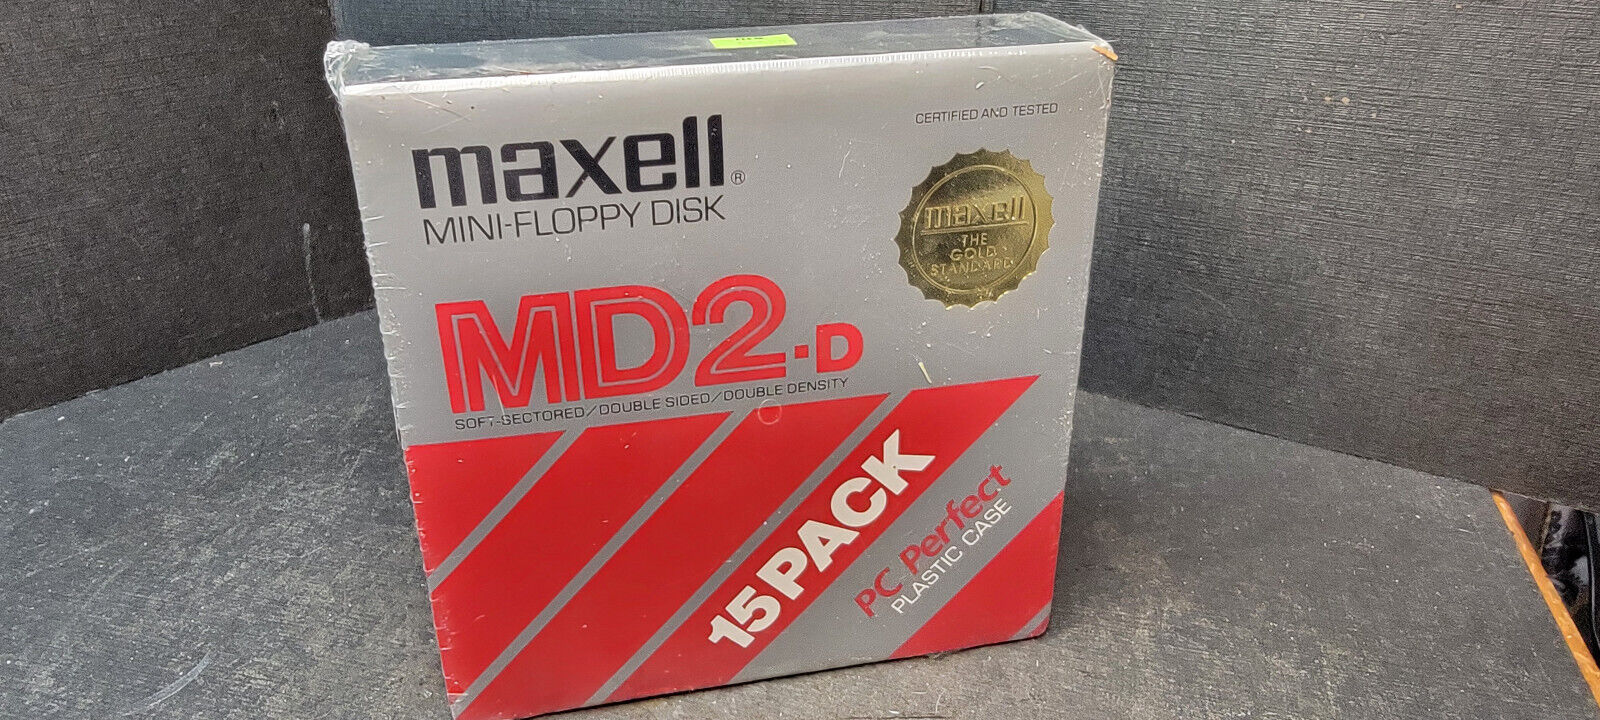 Maxell Mini-floppy Disk MD2-d 15 Pack New Sealed Packing